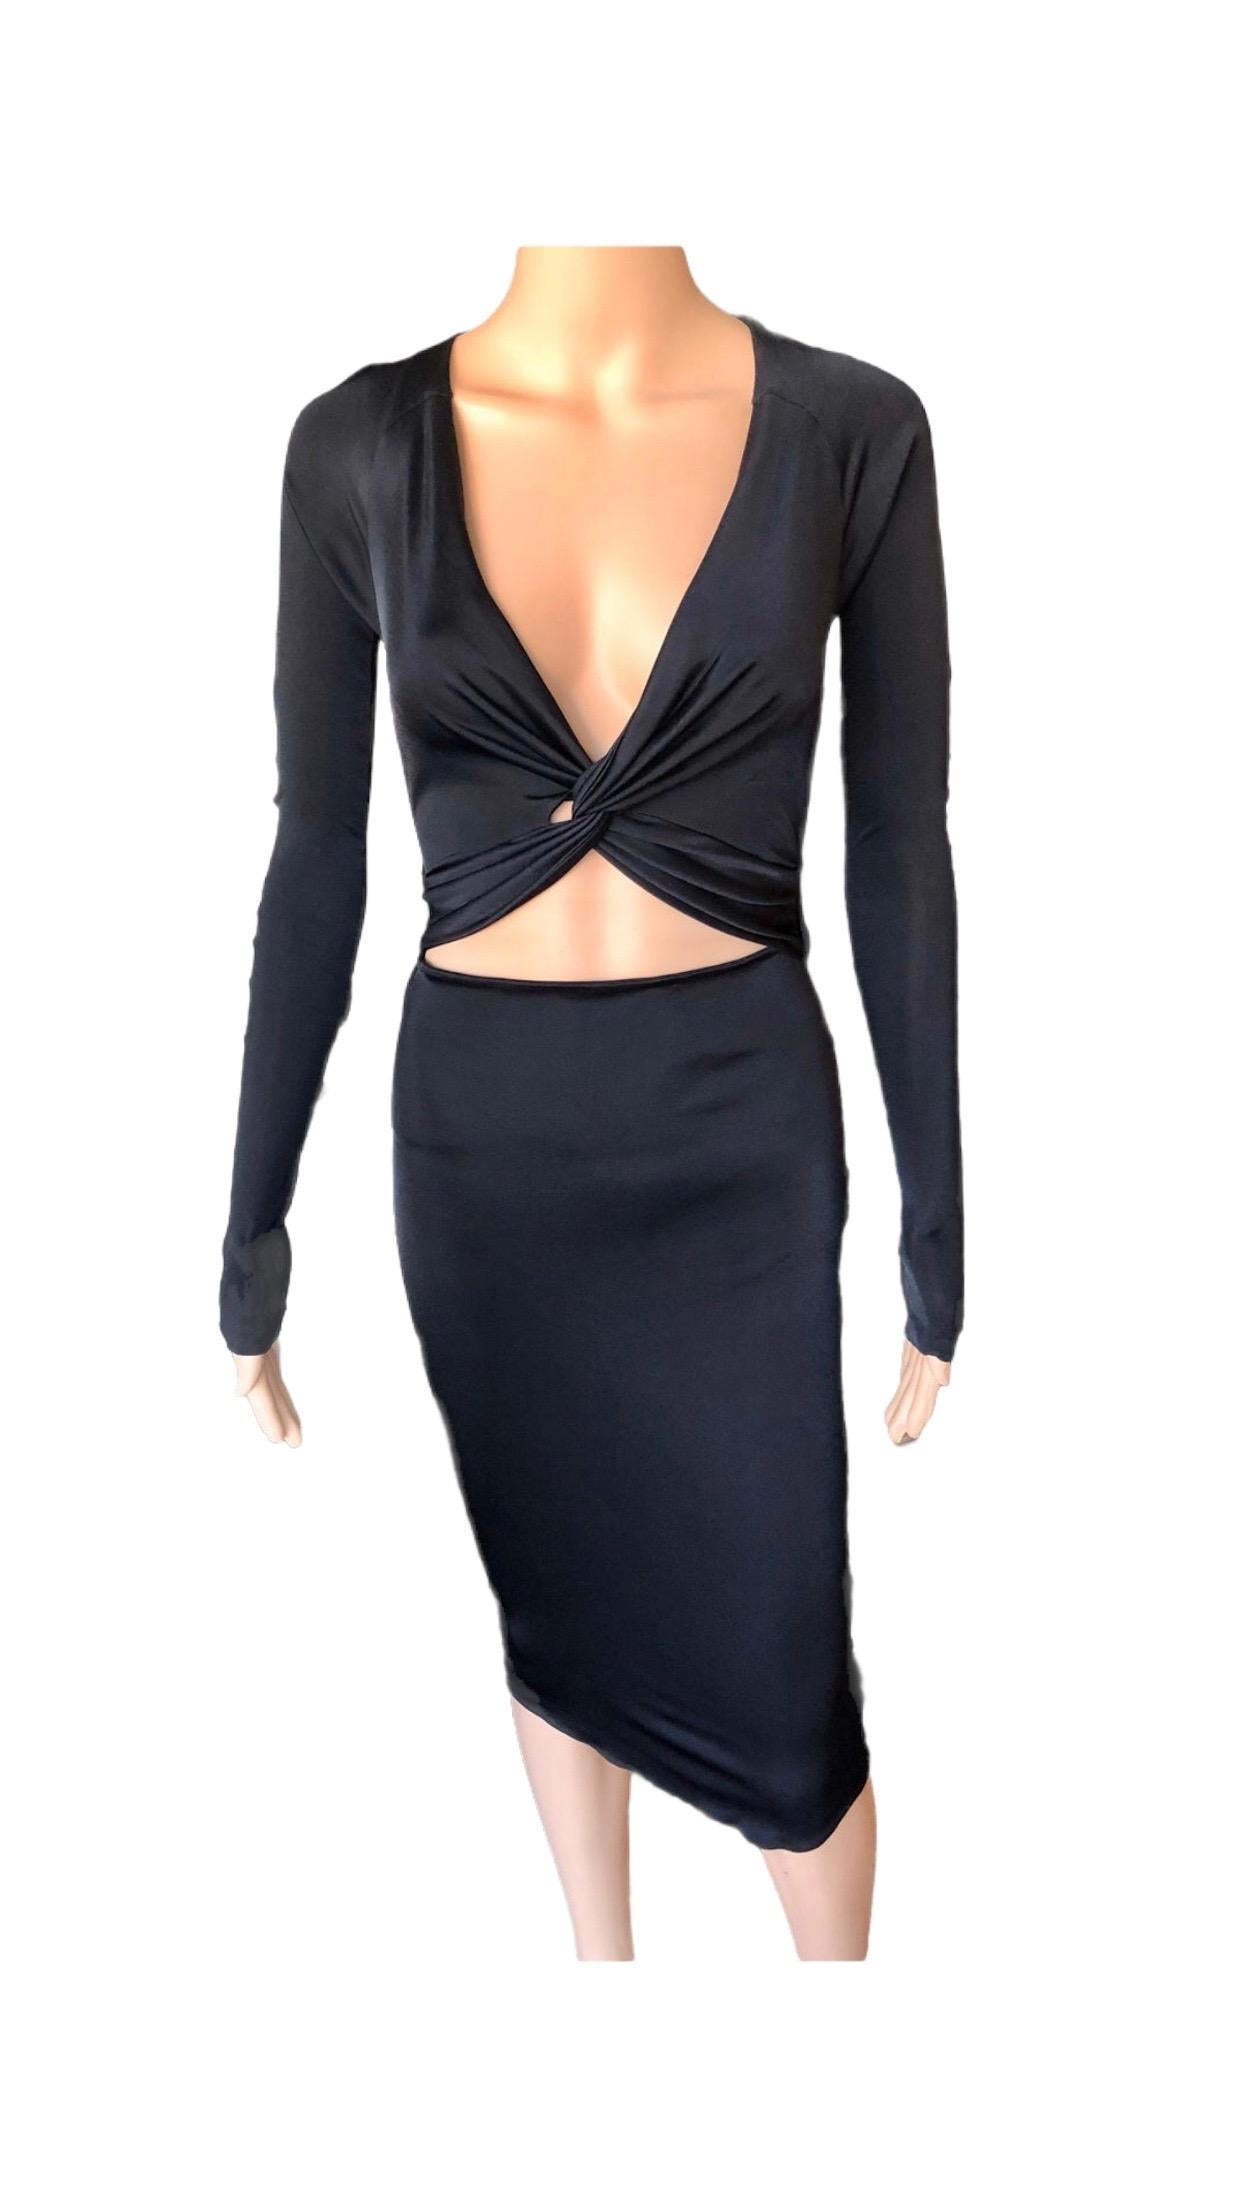 Gucci S/S 2005 Tom Ford Plunging Cutout Backless Bodycon Black Dress For Sale 3